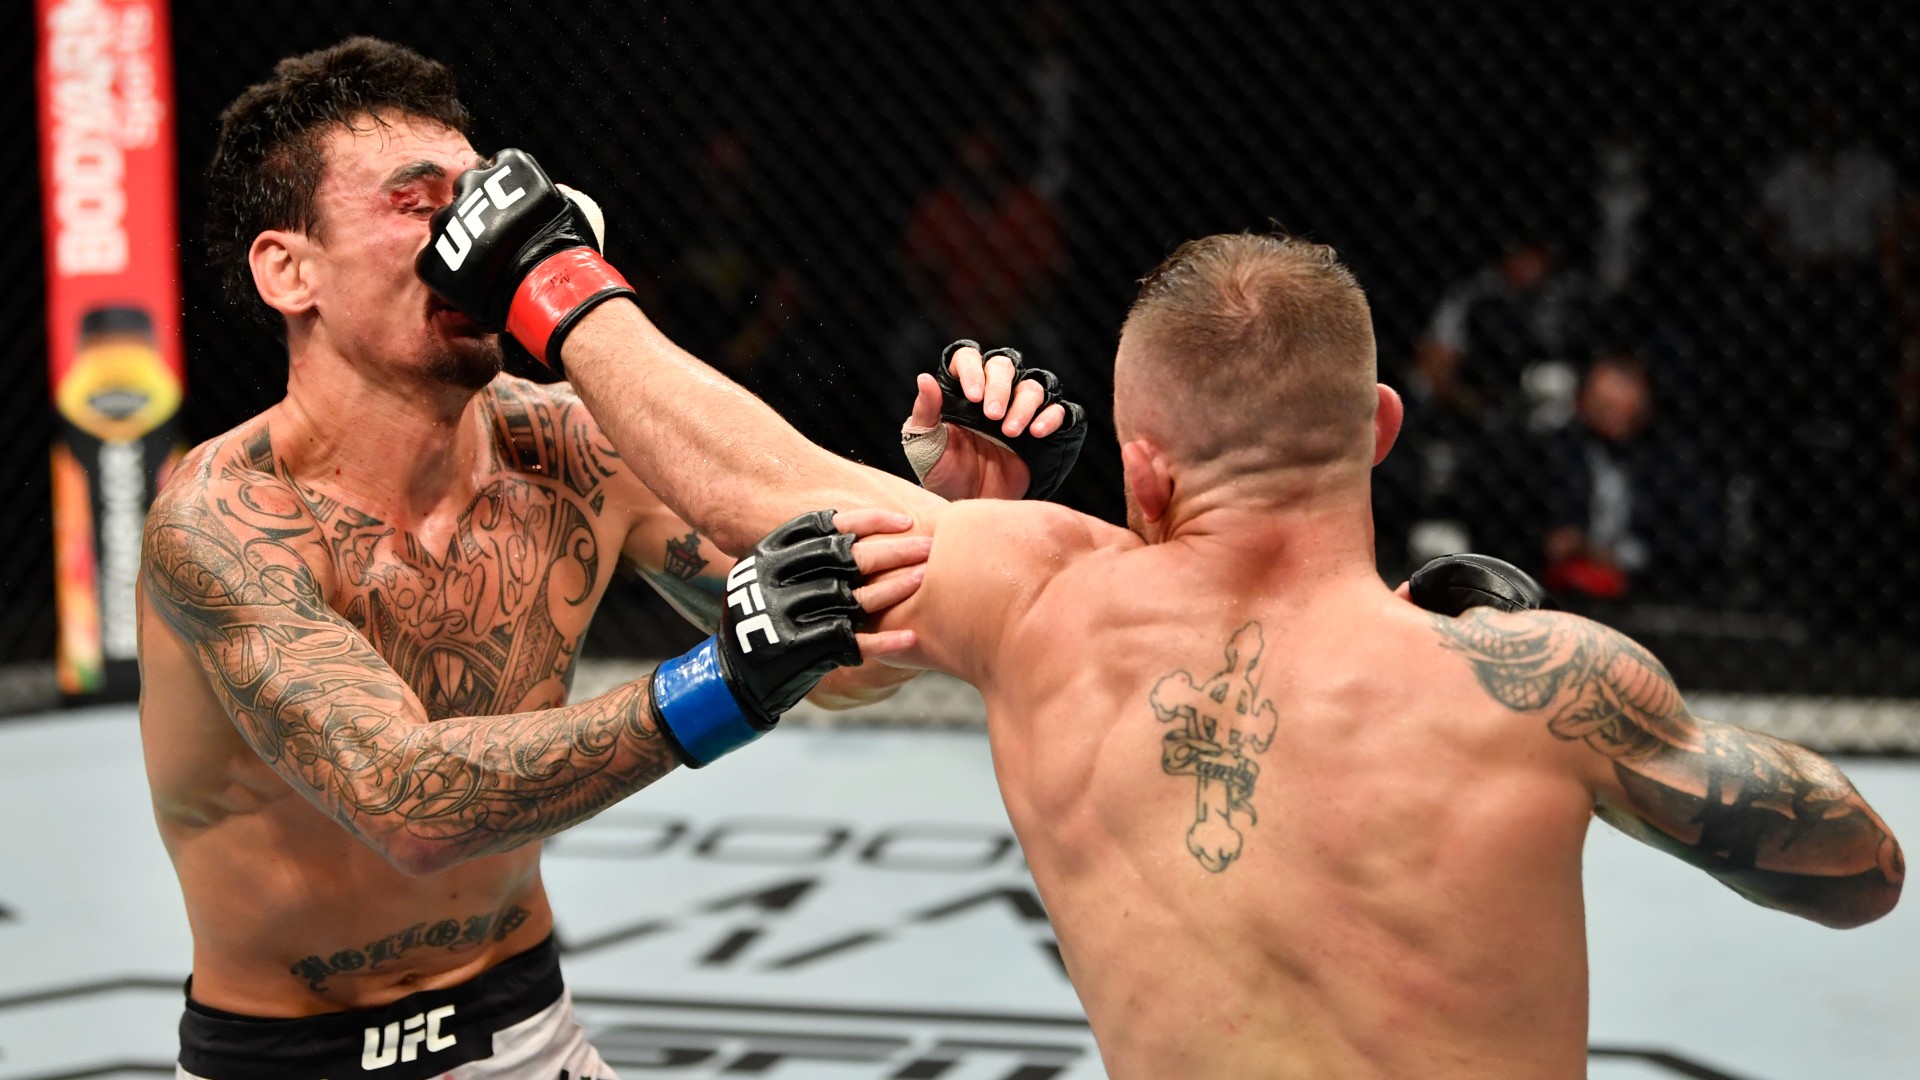 Alexander Volkanovski vs. Max Holloway UFC 276 Odds, Pick & Prediction: Champ to Make it 3-0 Against Ex-Titleholder? (Saturday, July 2) article feature image